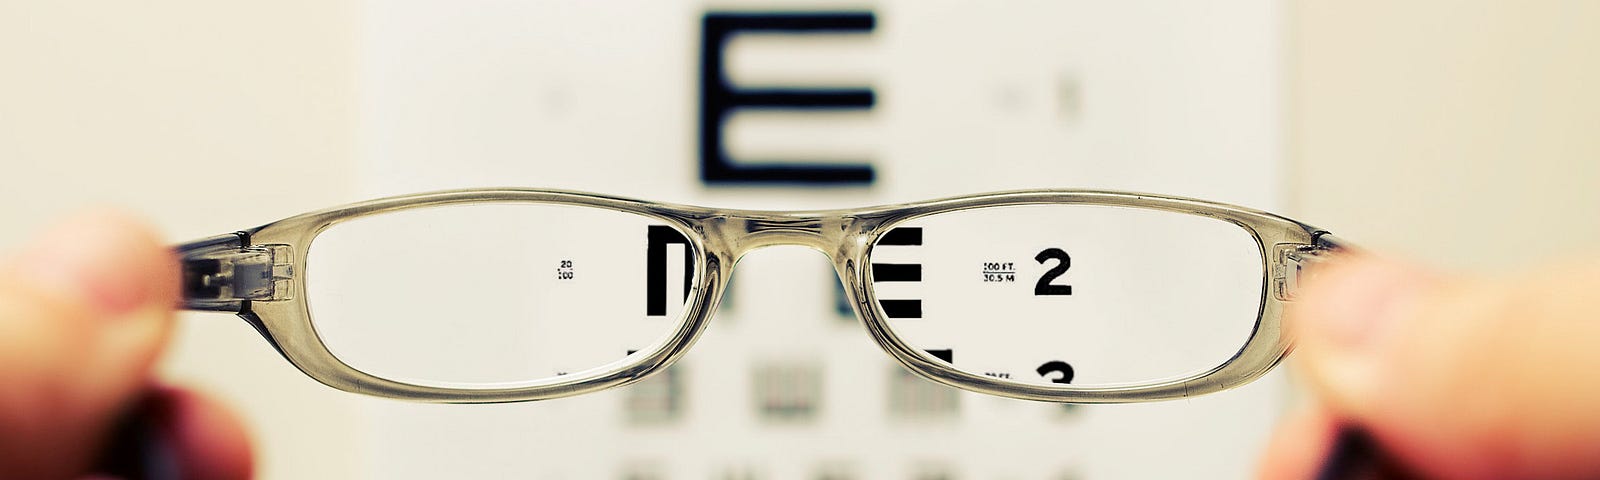 A person’s hands holding an eyeglasses for sight checking.